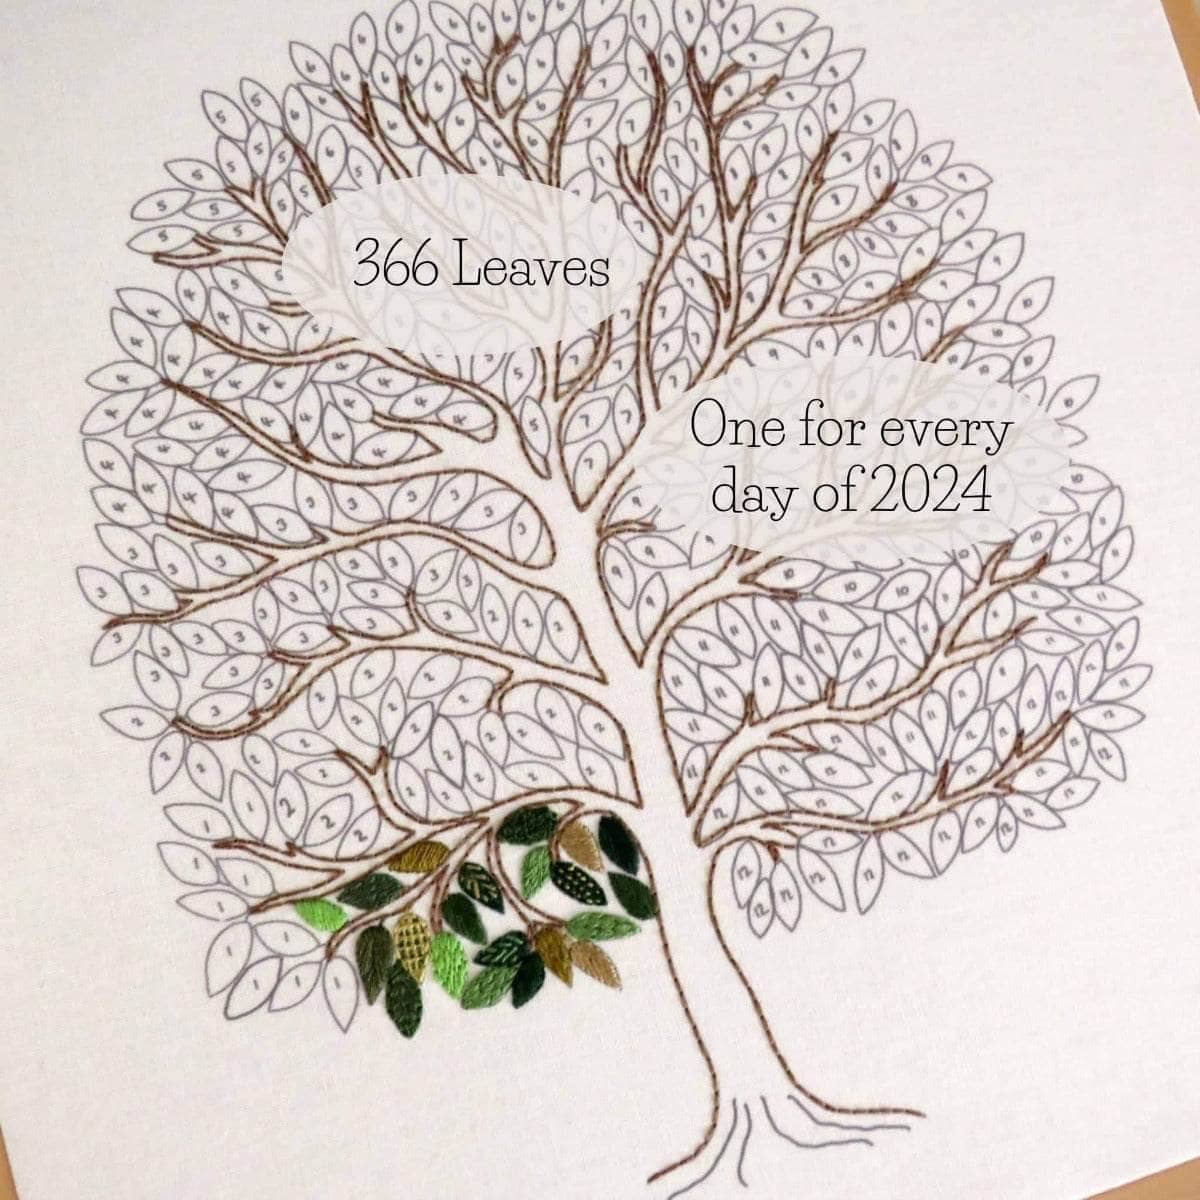 A Year of Tiny Leaves PDF Embroidery Template , PDF Download , StitchDoodles , embroidery hoop kit, Embroidery Kit, embroidery kit for adults, embroidery kit fro beginners, embroidery pattern, flower embroidery, hand embroidery, hand embroidery kit, hand embroidery pattern, modern embroidery kits, month embroidery, PDF pattern, year embroidery , StitchDoodles , shop.stitchdoodles.com